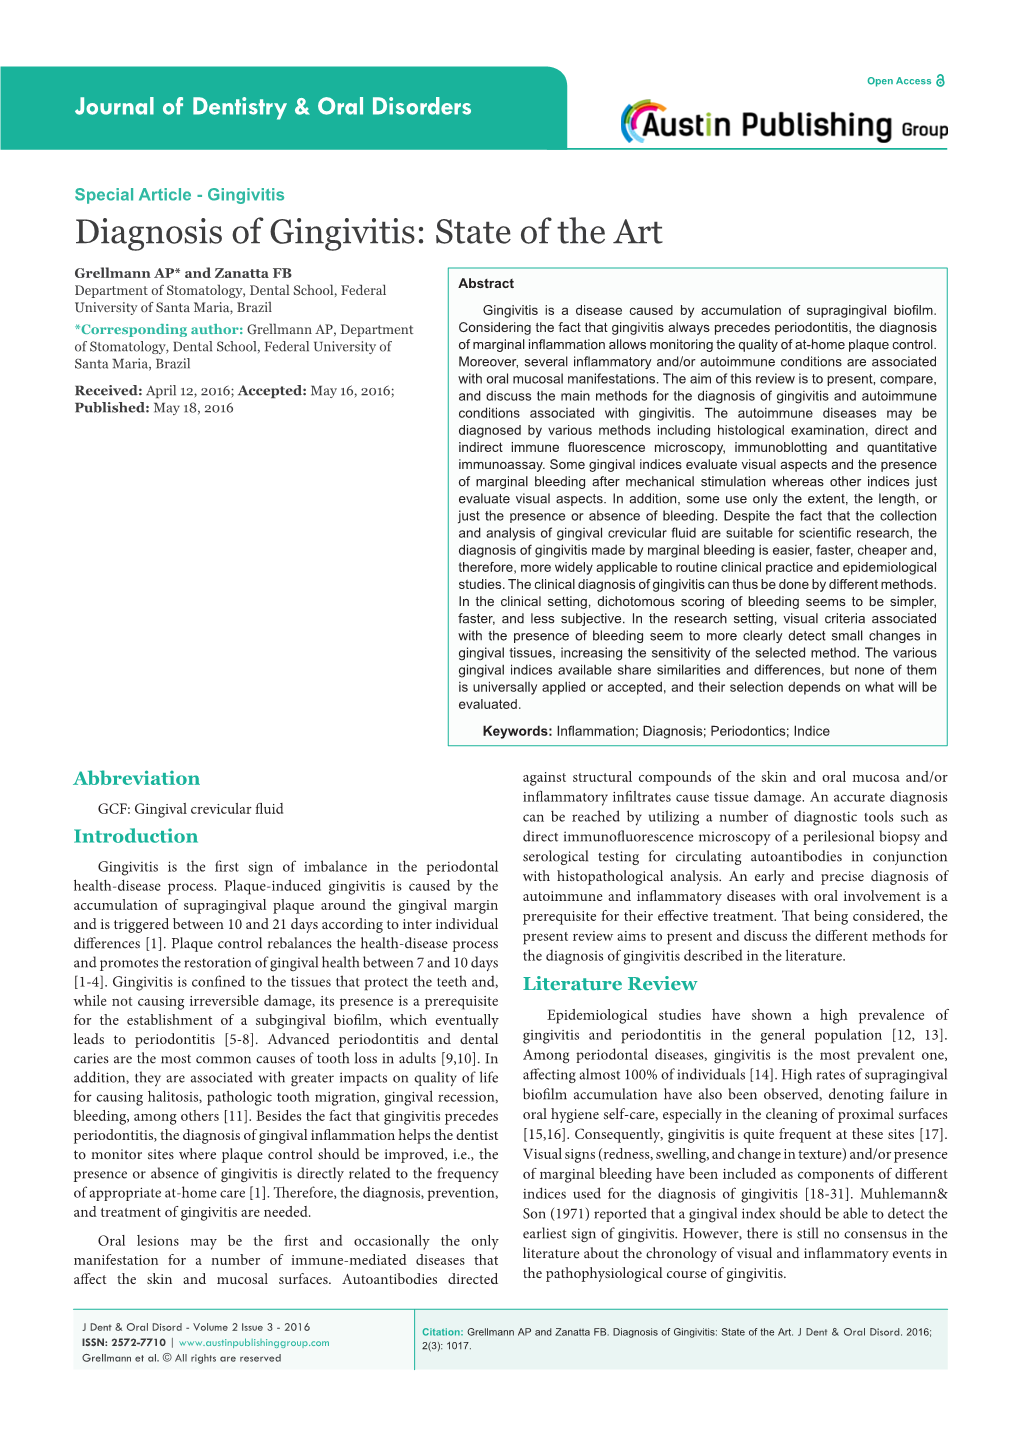 Diagnosis of Gingivitis: State of the Art